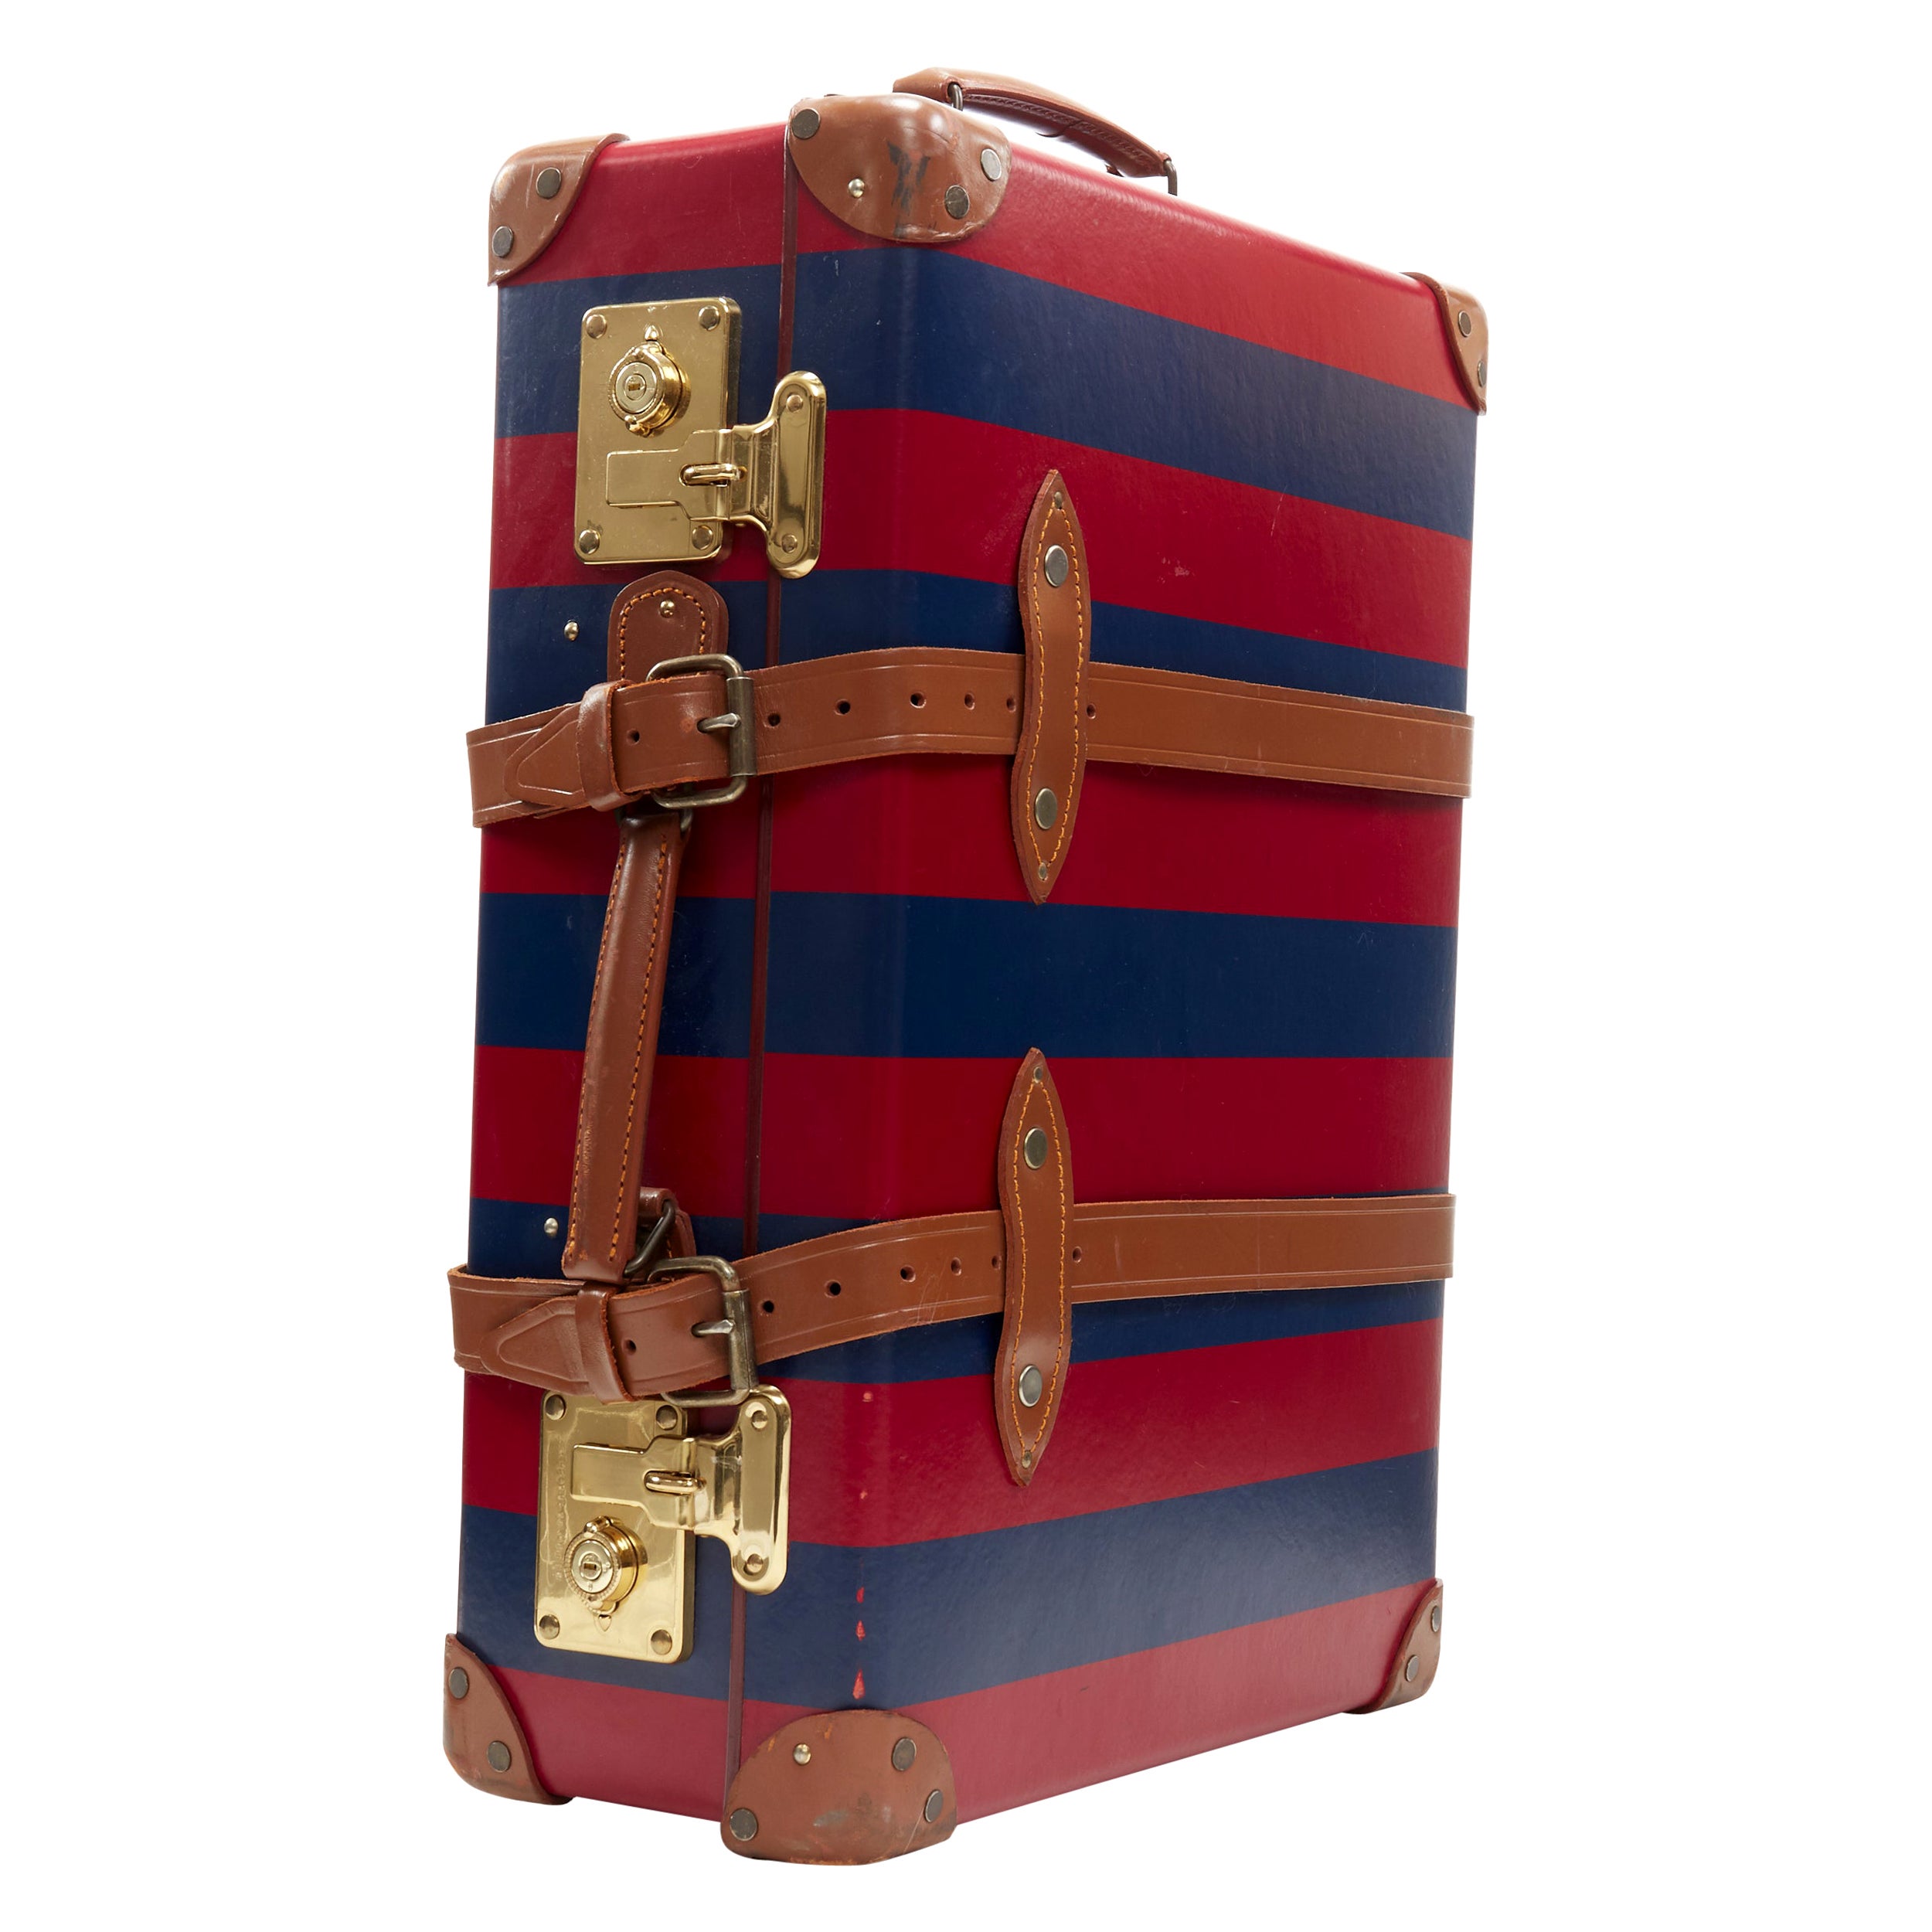 GLOBETROTTER MANOLO BLAHNIK Limited Edition red blue striped 21" trolley case